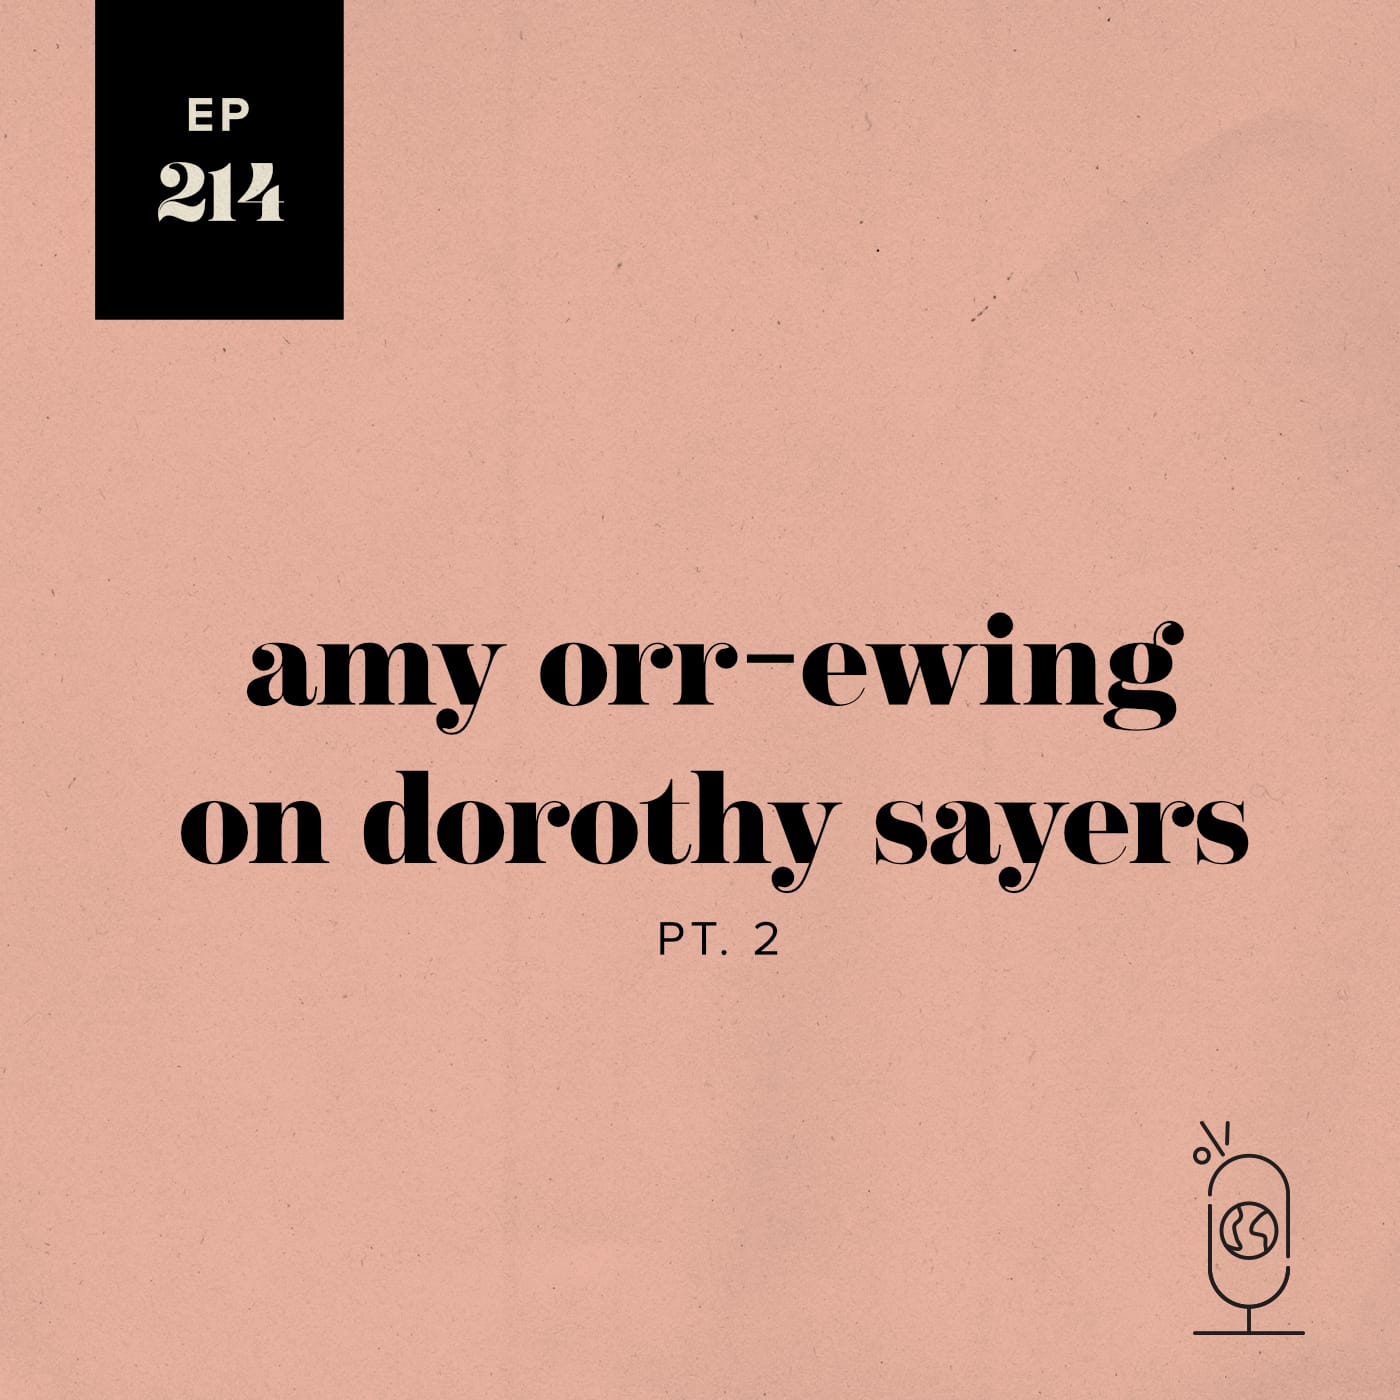 Amy Orr-Ewing on Dorothy Sayers, Part 2